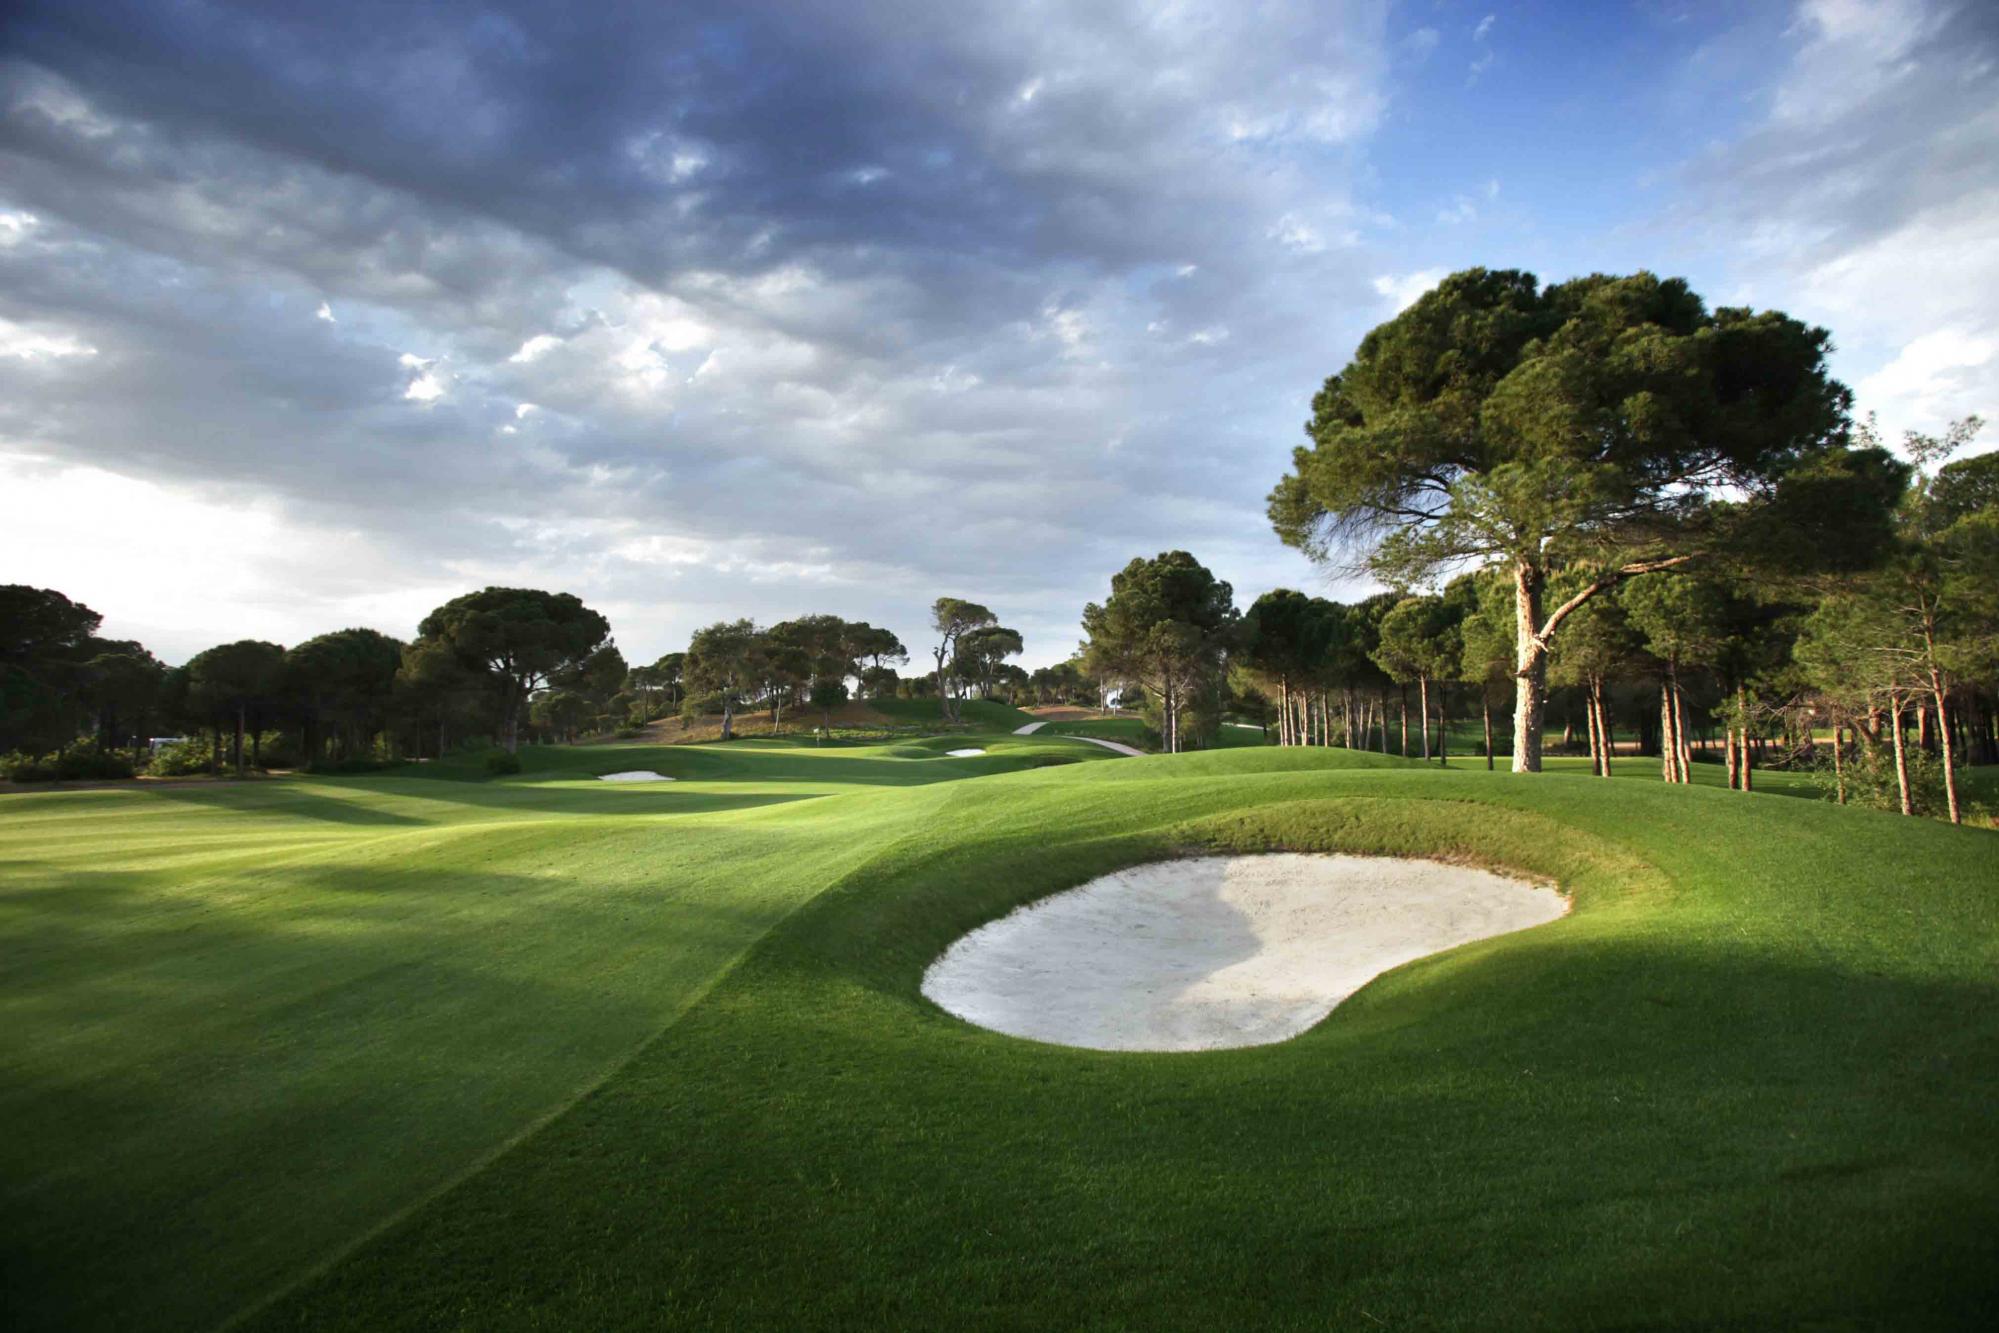 All The Montgomerie Maxx Royal Golf Club's scenic golf course in vibrant Belek.